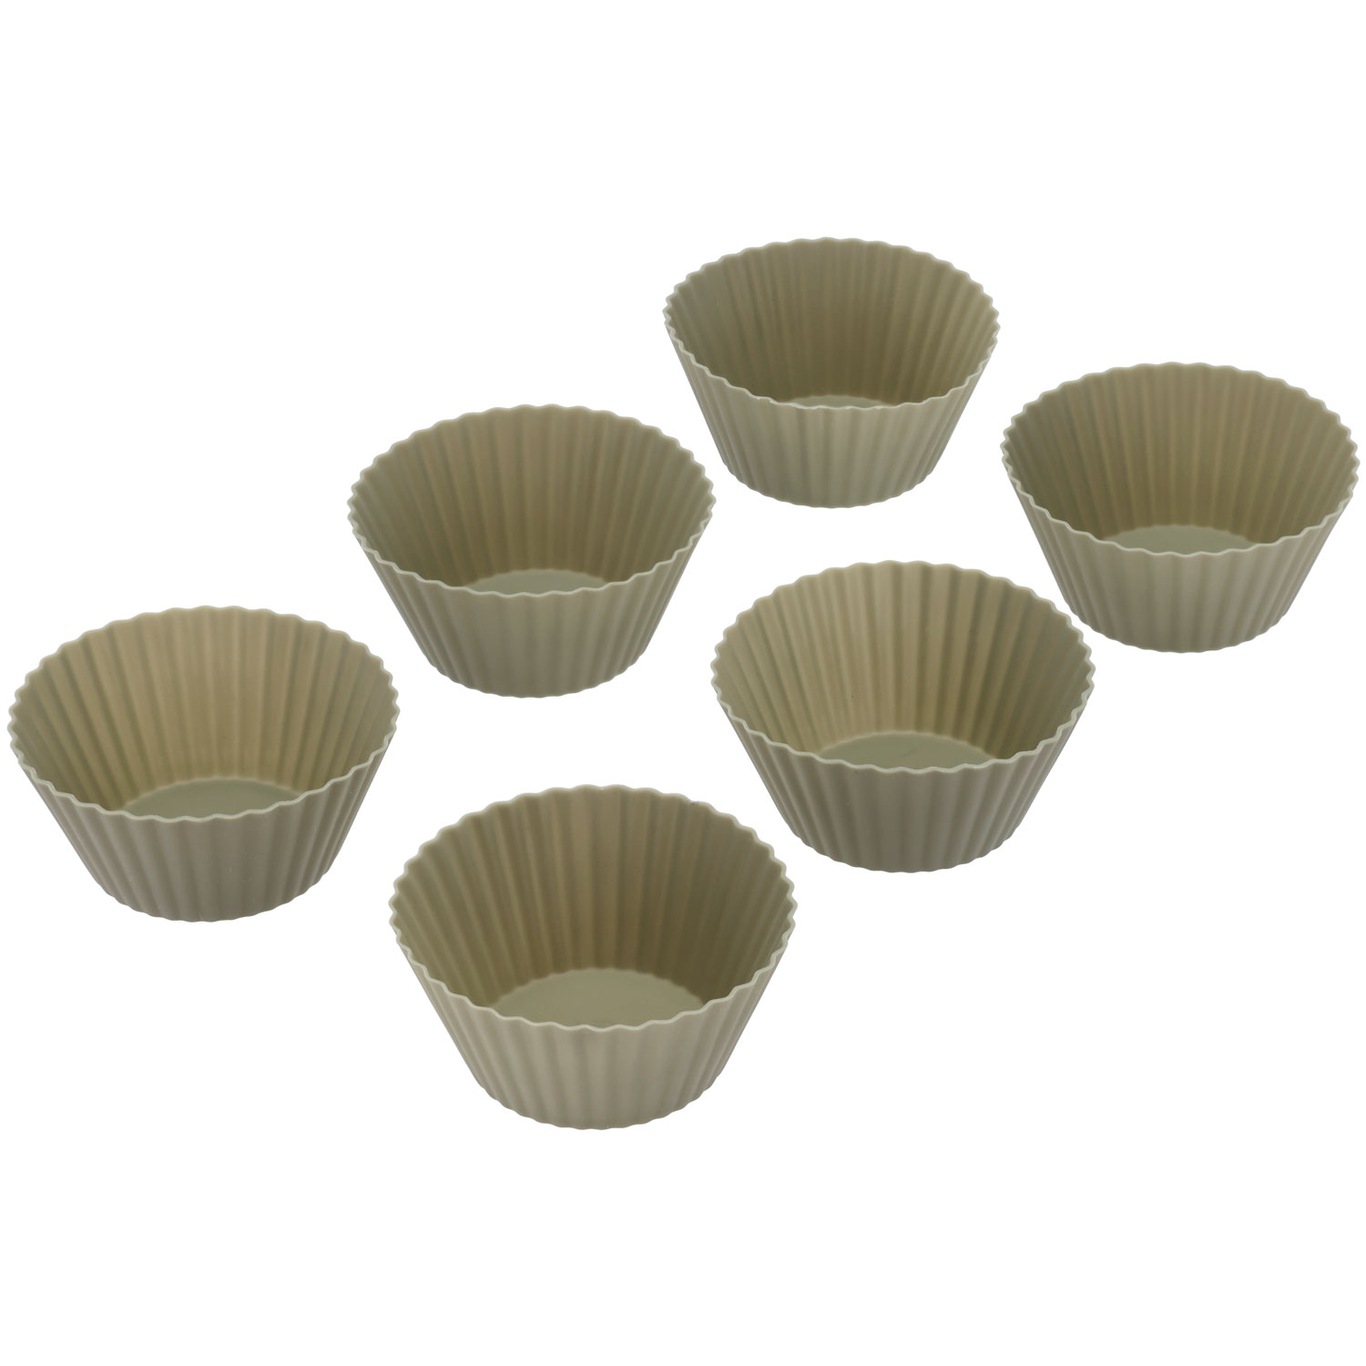 Pecan Cupcake Cases 6-pack, Forest Green